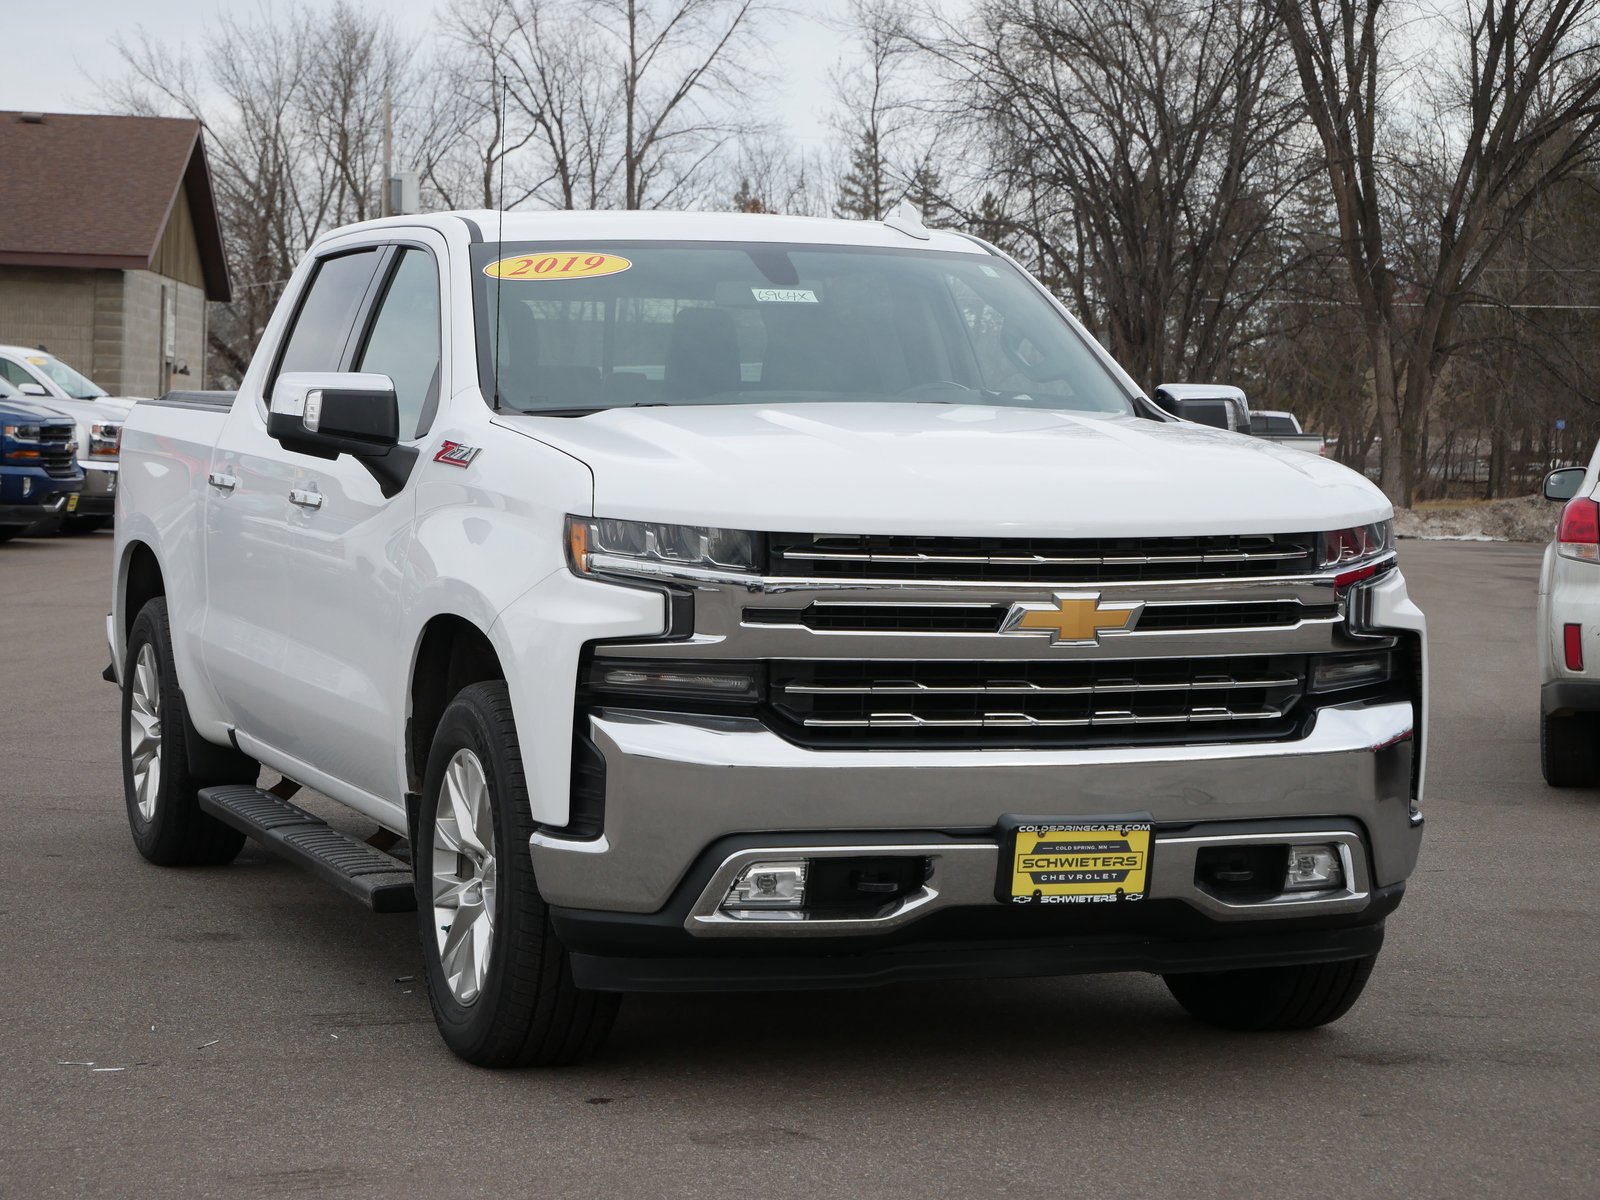 Used 2019 Chevrolet Silverado 1500 LTZ with VIN 1GCUYGEDXKZ141834 for sale in Cold Spring, Minnesota